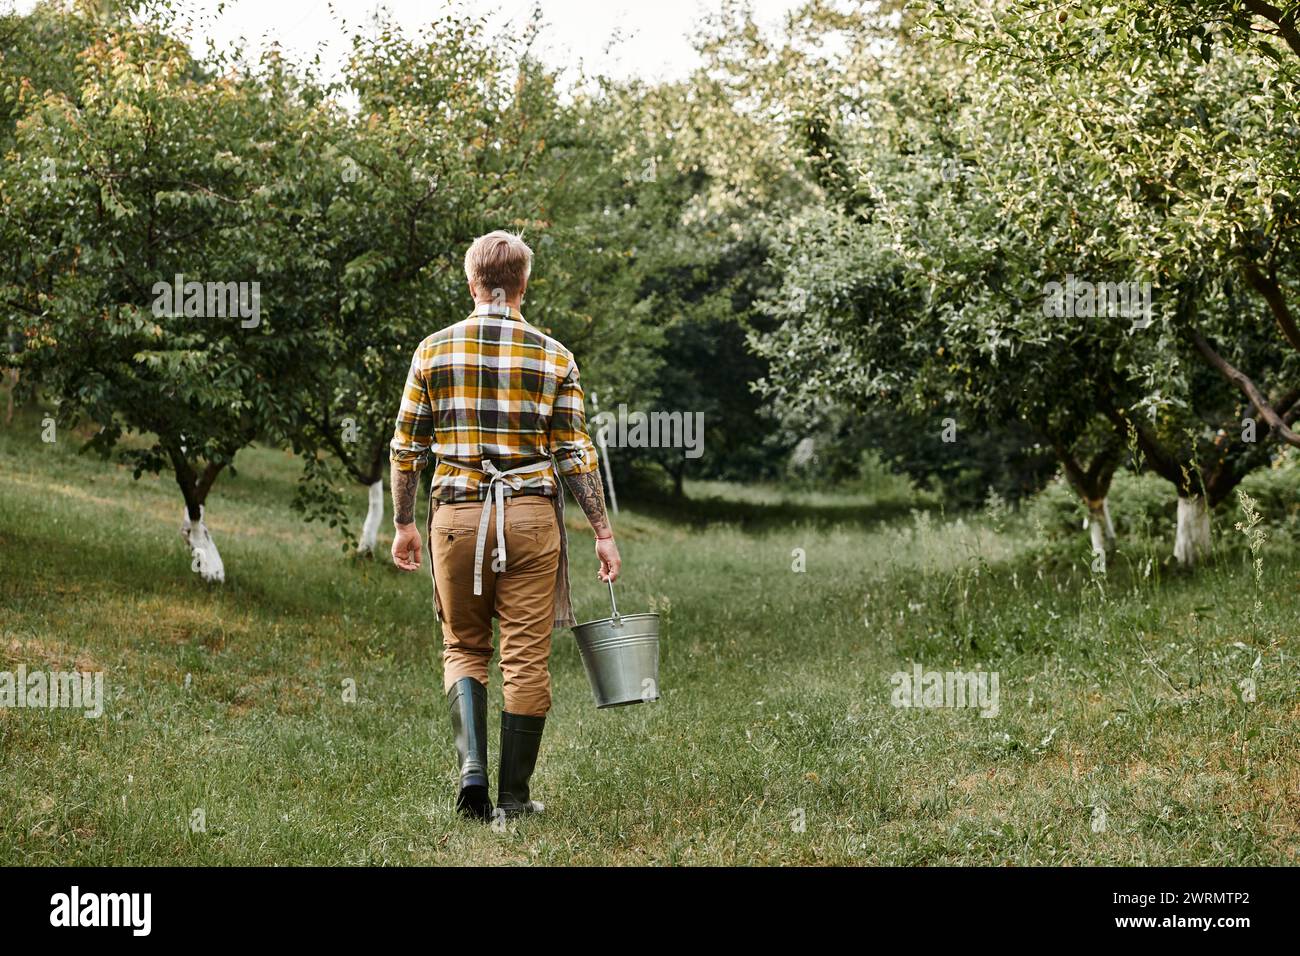 back view hardworking man with tattoos on arms working in garden and holding metal bucket in hand Stock Photo